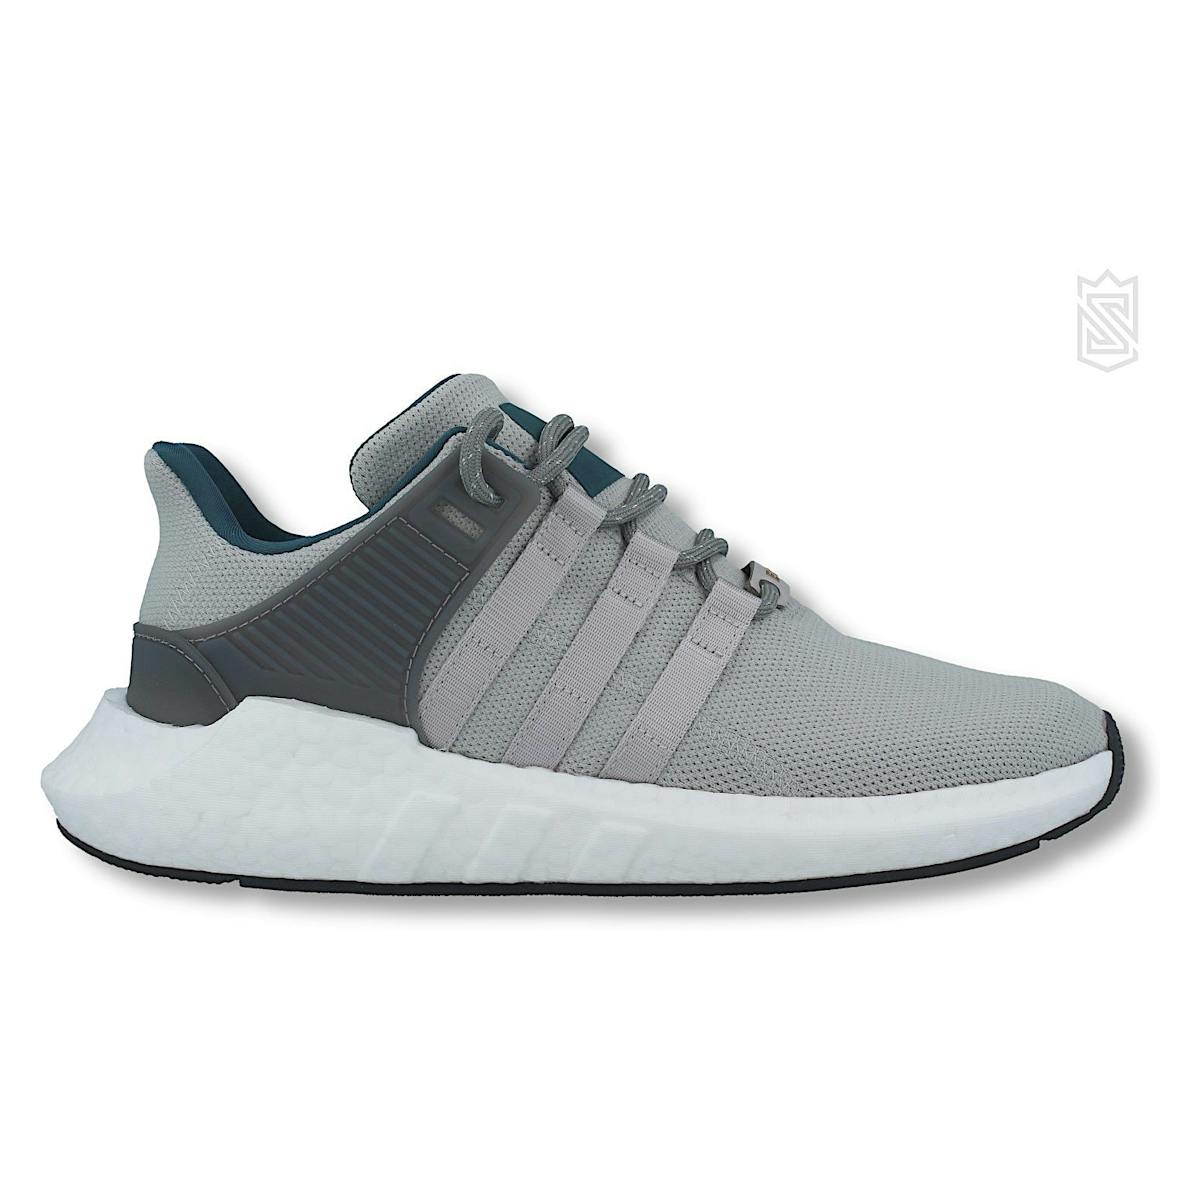 adidas EQT Support 93/17 Welding Pack Grey Two